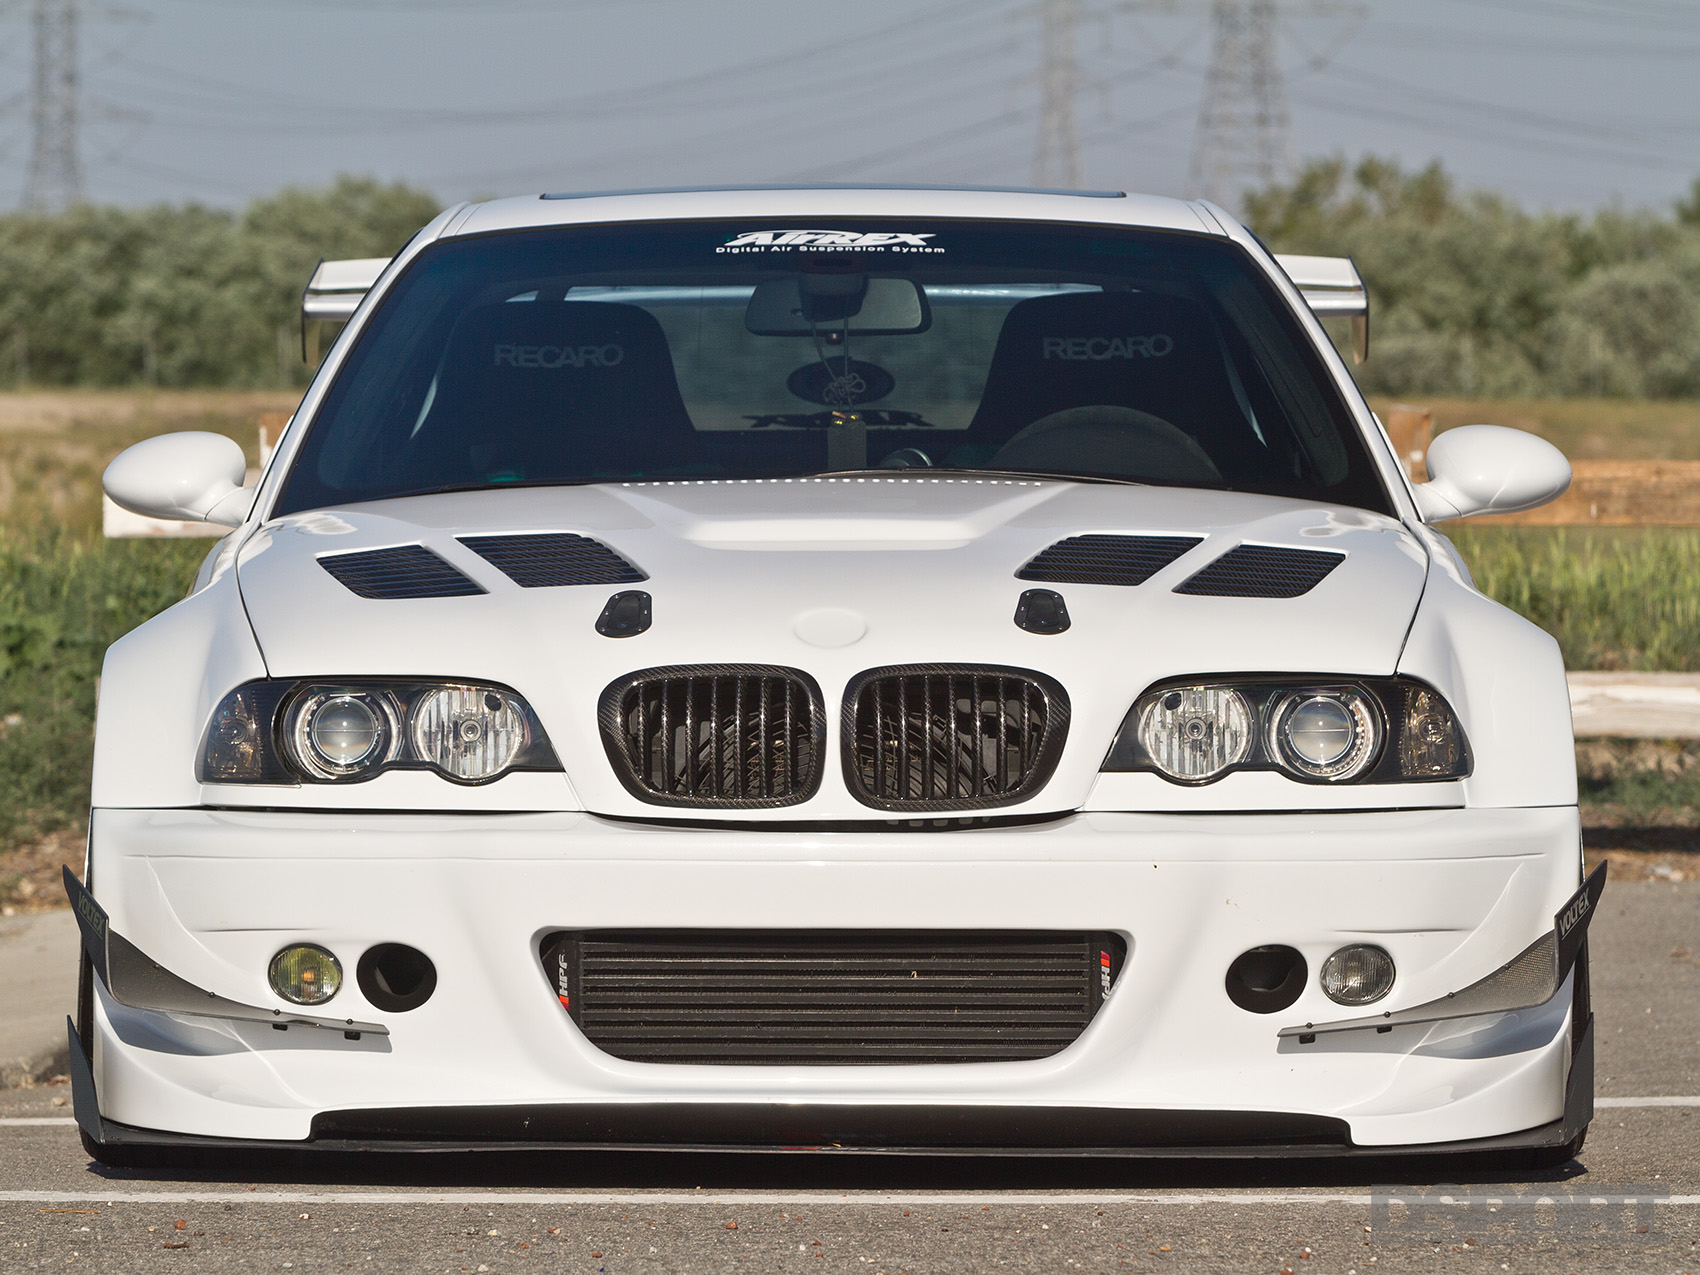 DSPORT Magazine feature editorial on this turbocharged E46 BMW M3.